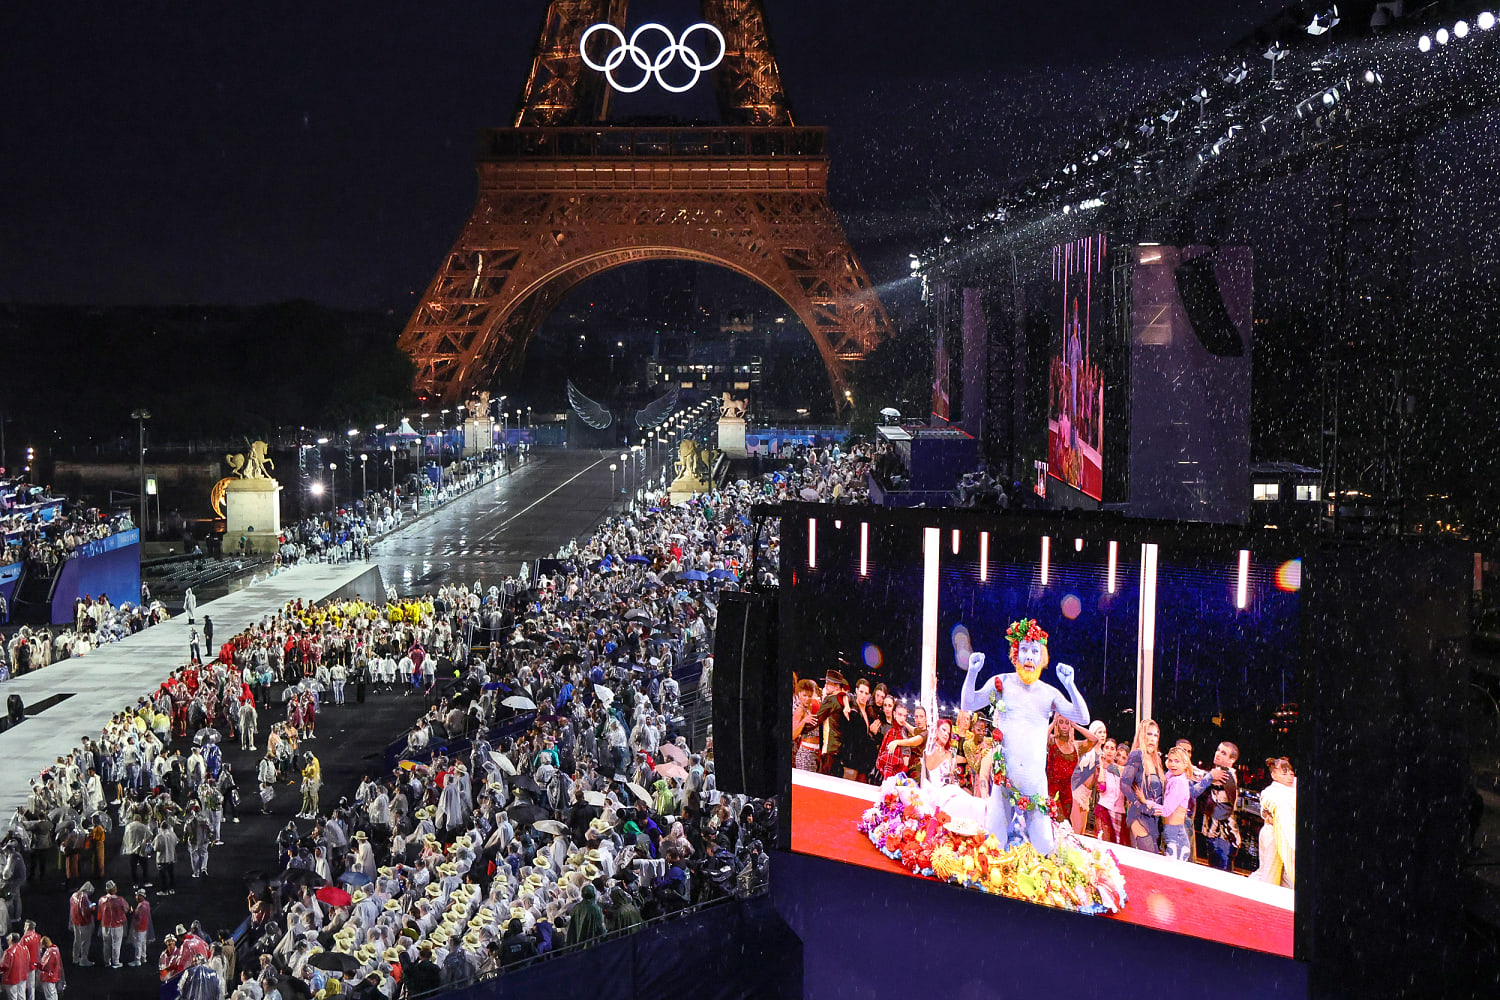 The ridiculous moral panic over the Olympics’ opening ceremony